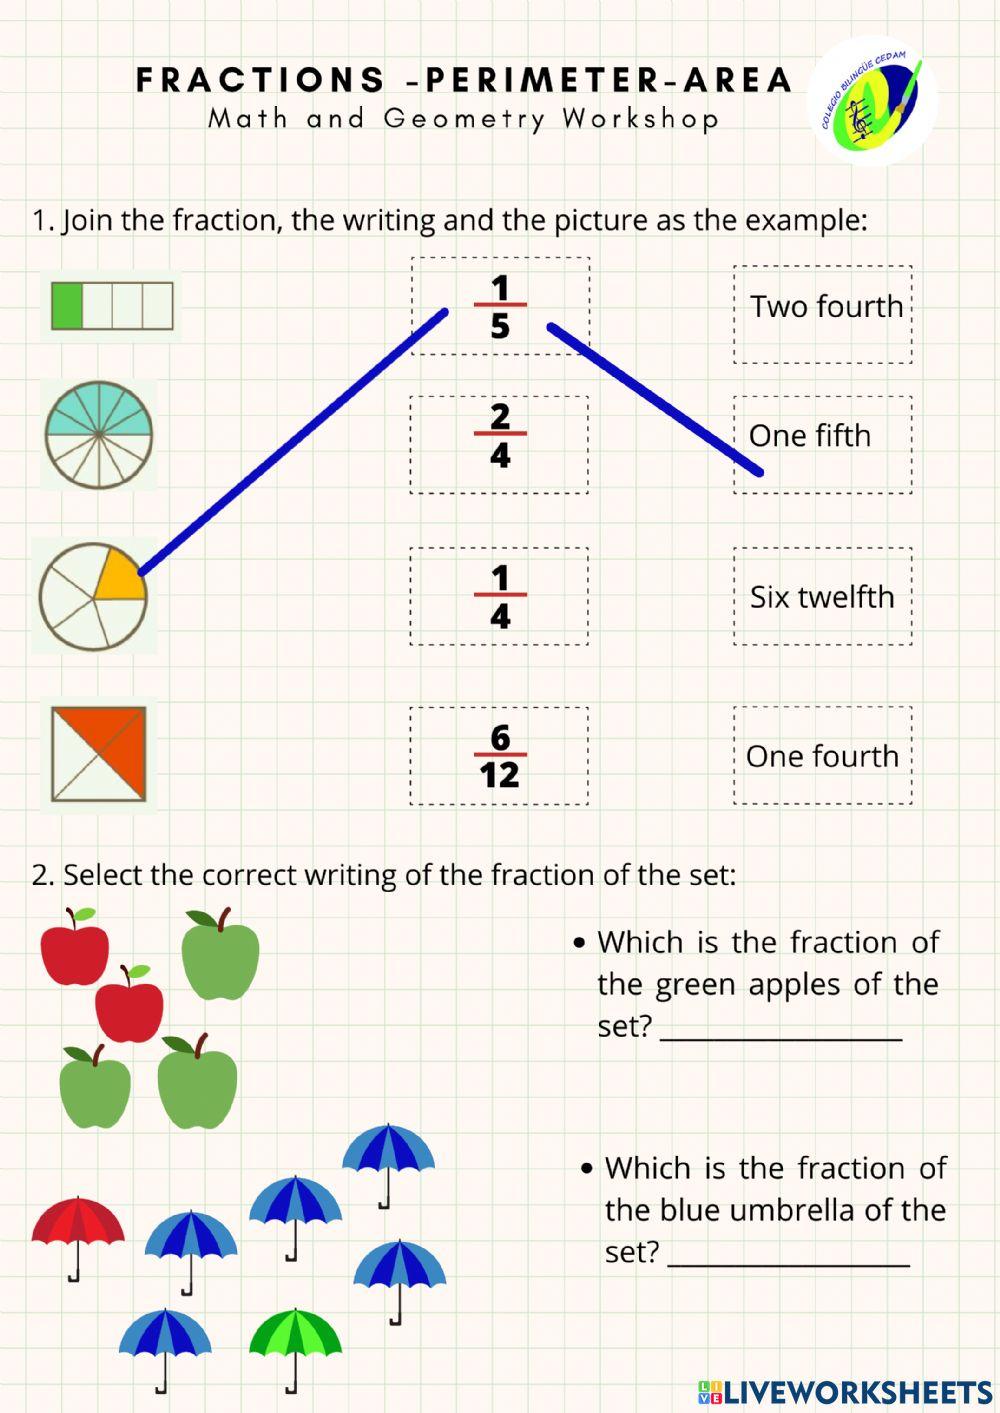 Fractions, perimeter and area